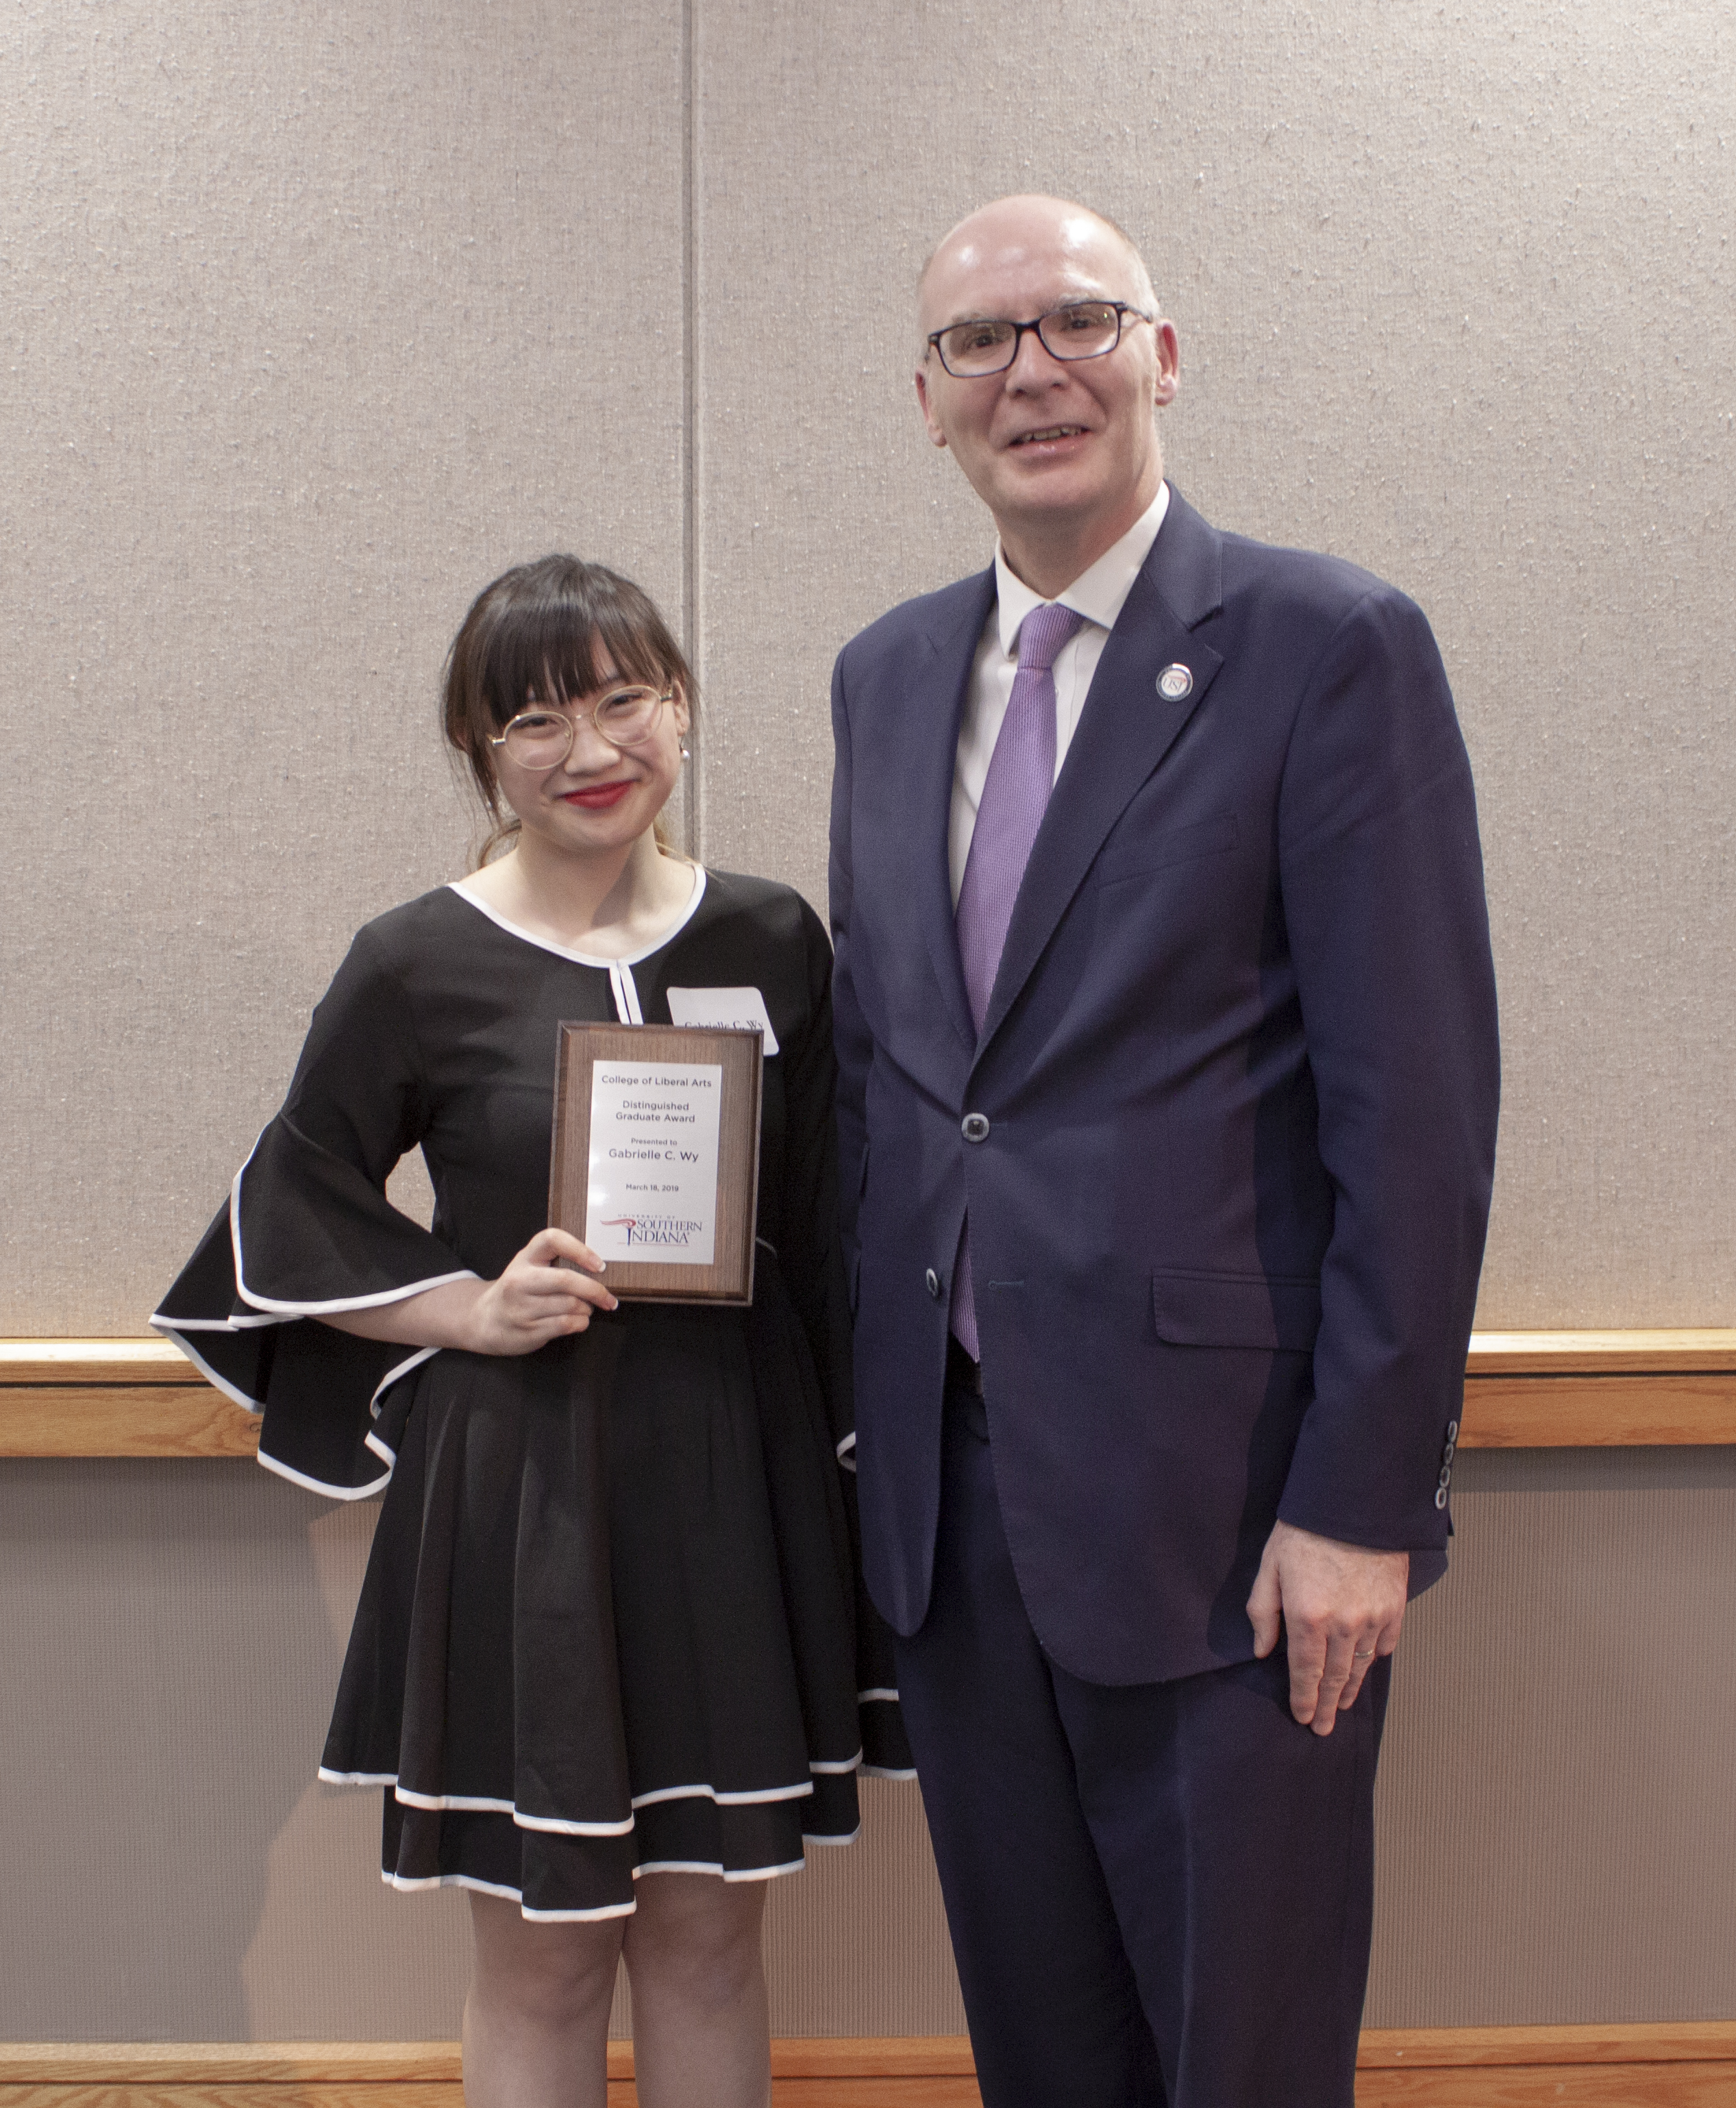 Gabrielle with Liberal Arts Dean James Beeby on Honors Day 2019